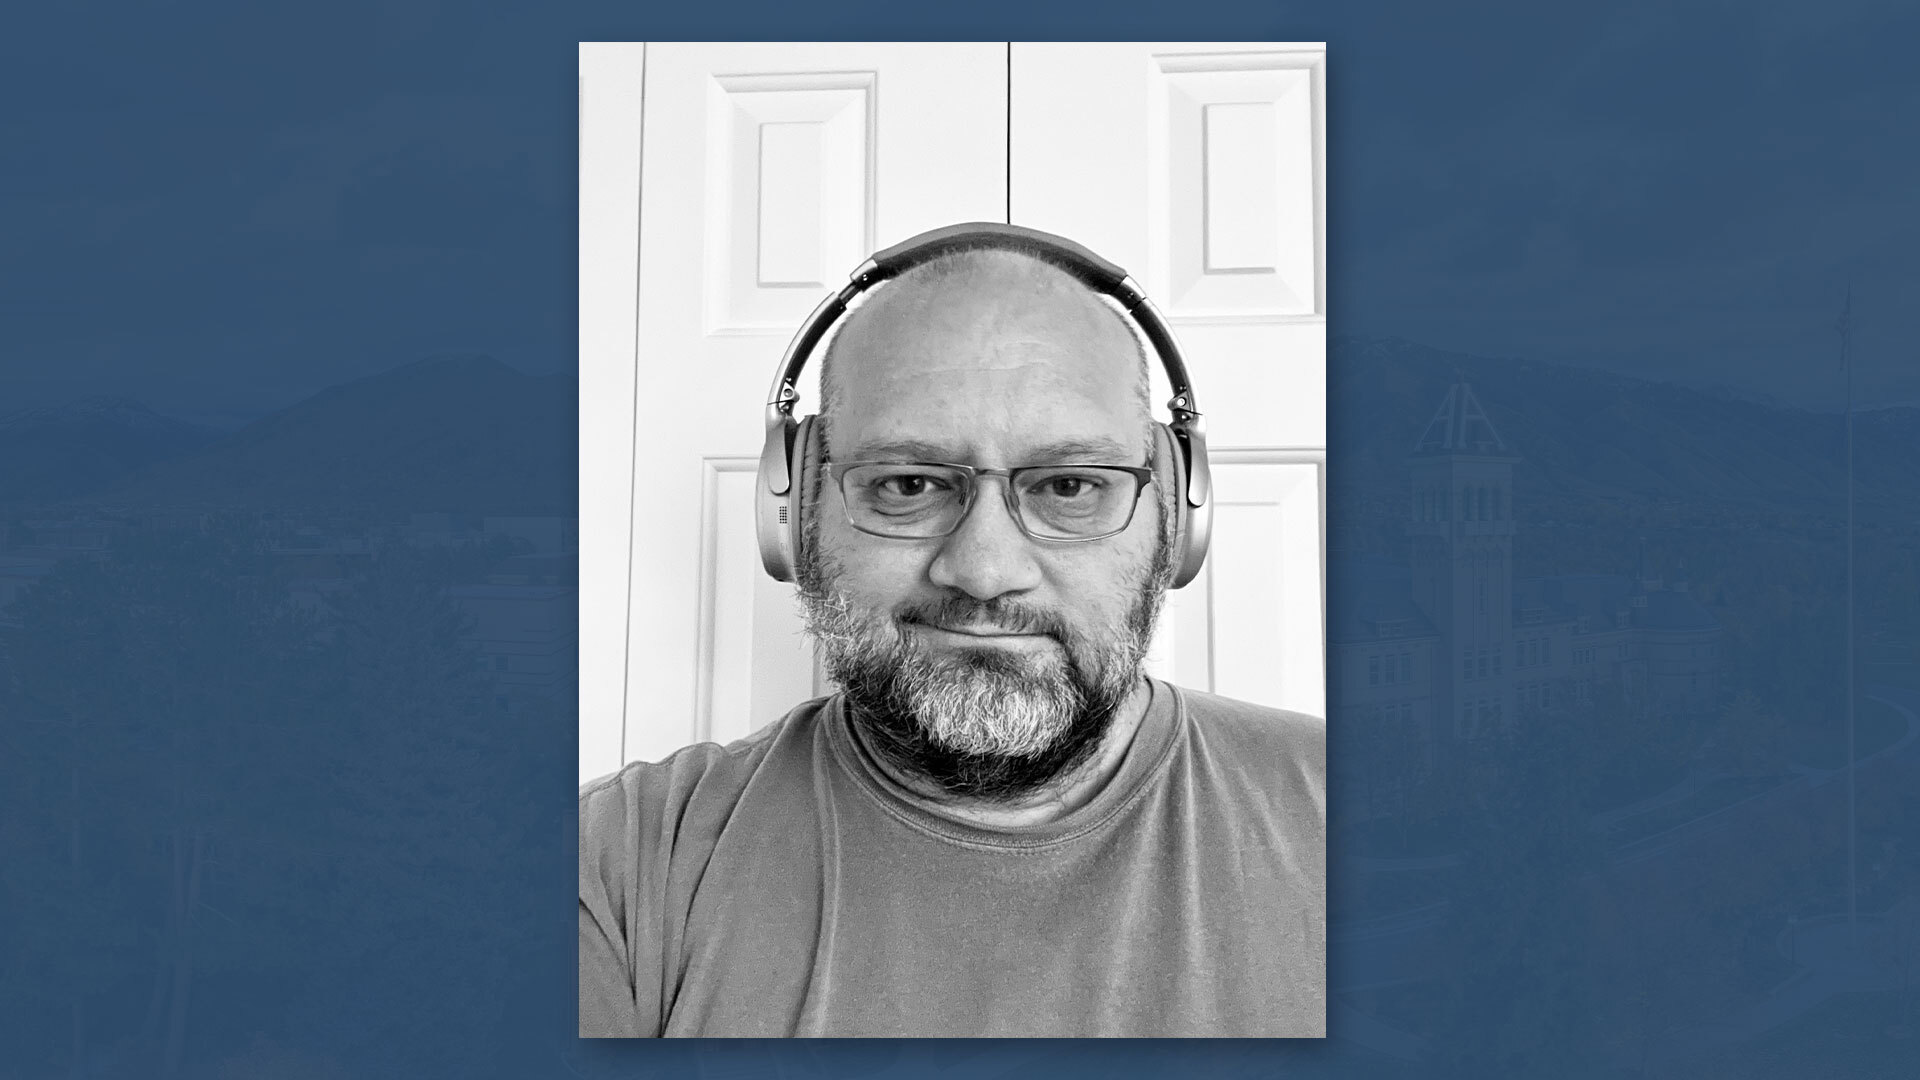 Black and white image of Professor Joshua Thoms wearing headphones on a blue background